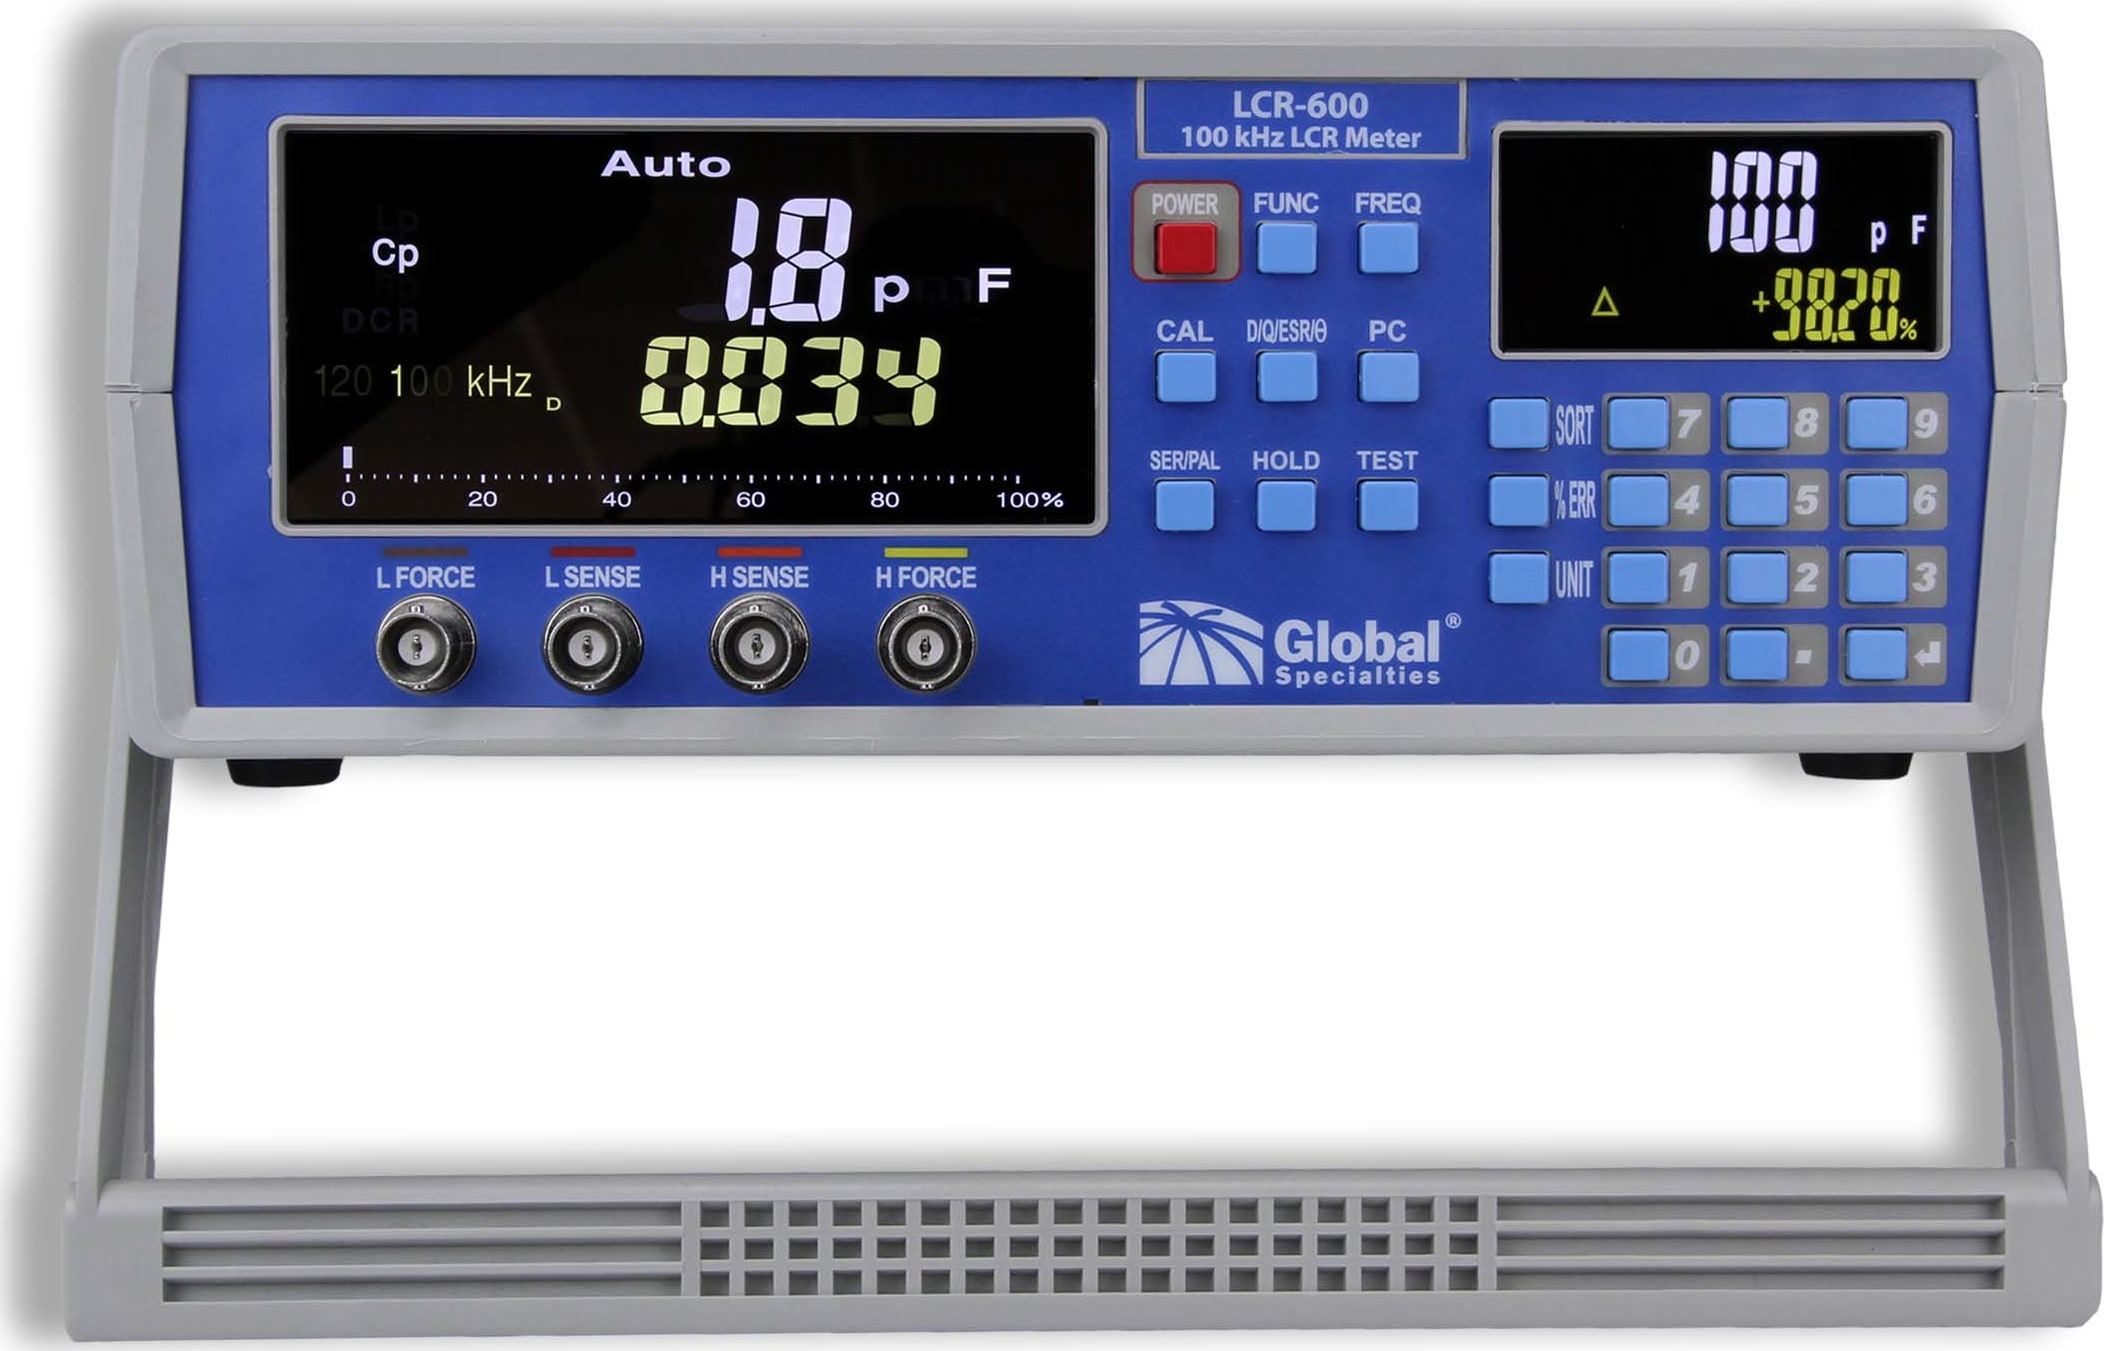 Global Specialties LCR-600 - 100 kHz High Precision LCR Meter